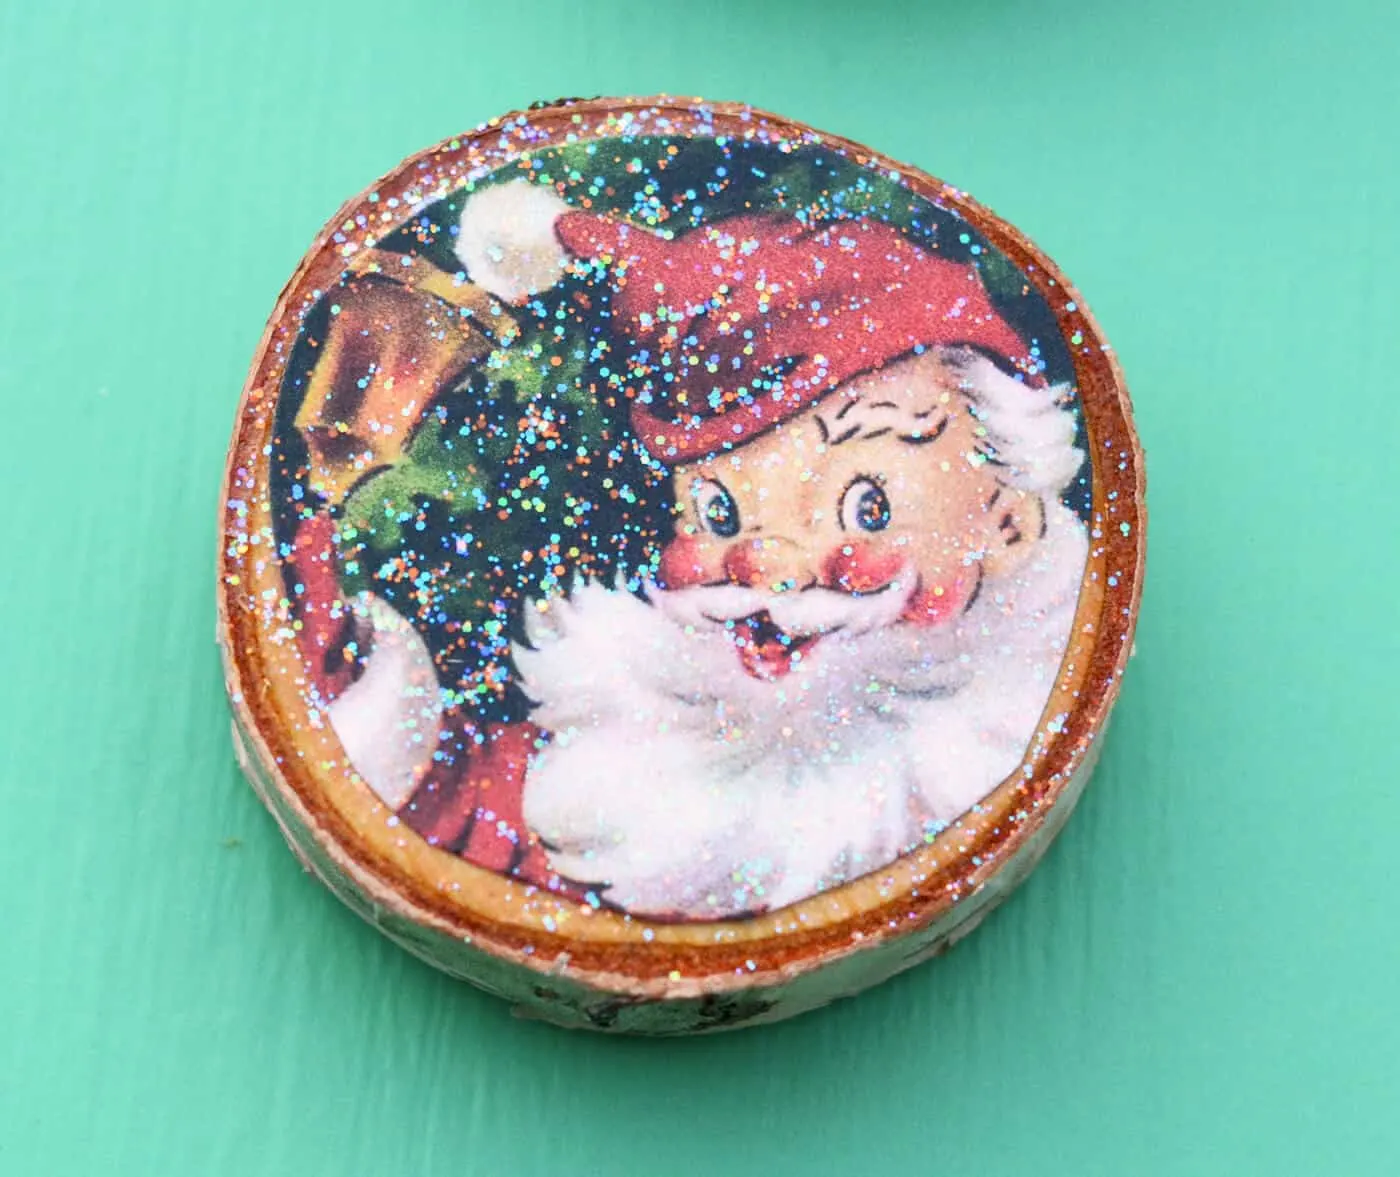 How to Paint Wooden Ornaments for Christmas - Mod Podge Rocks